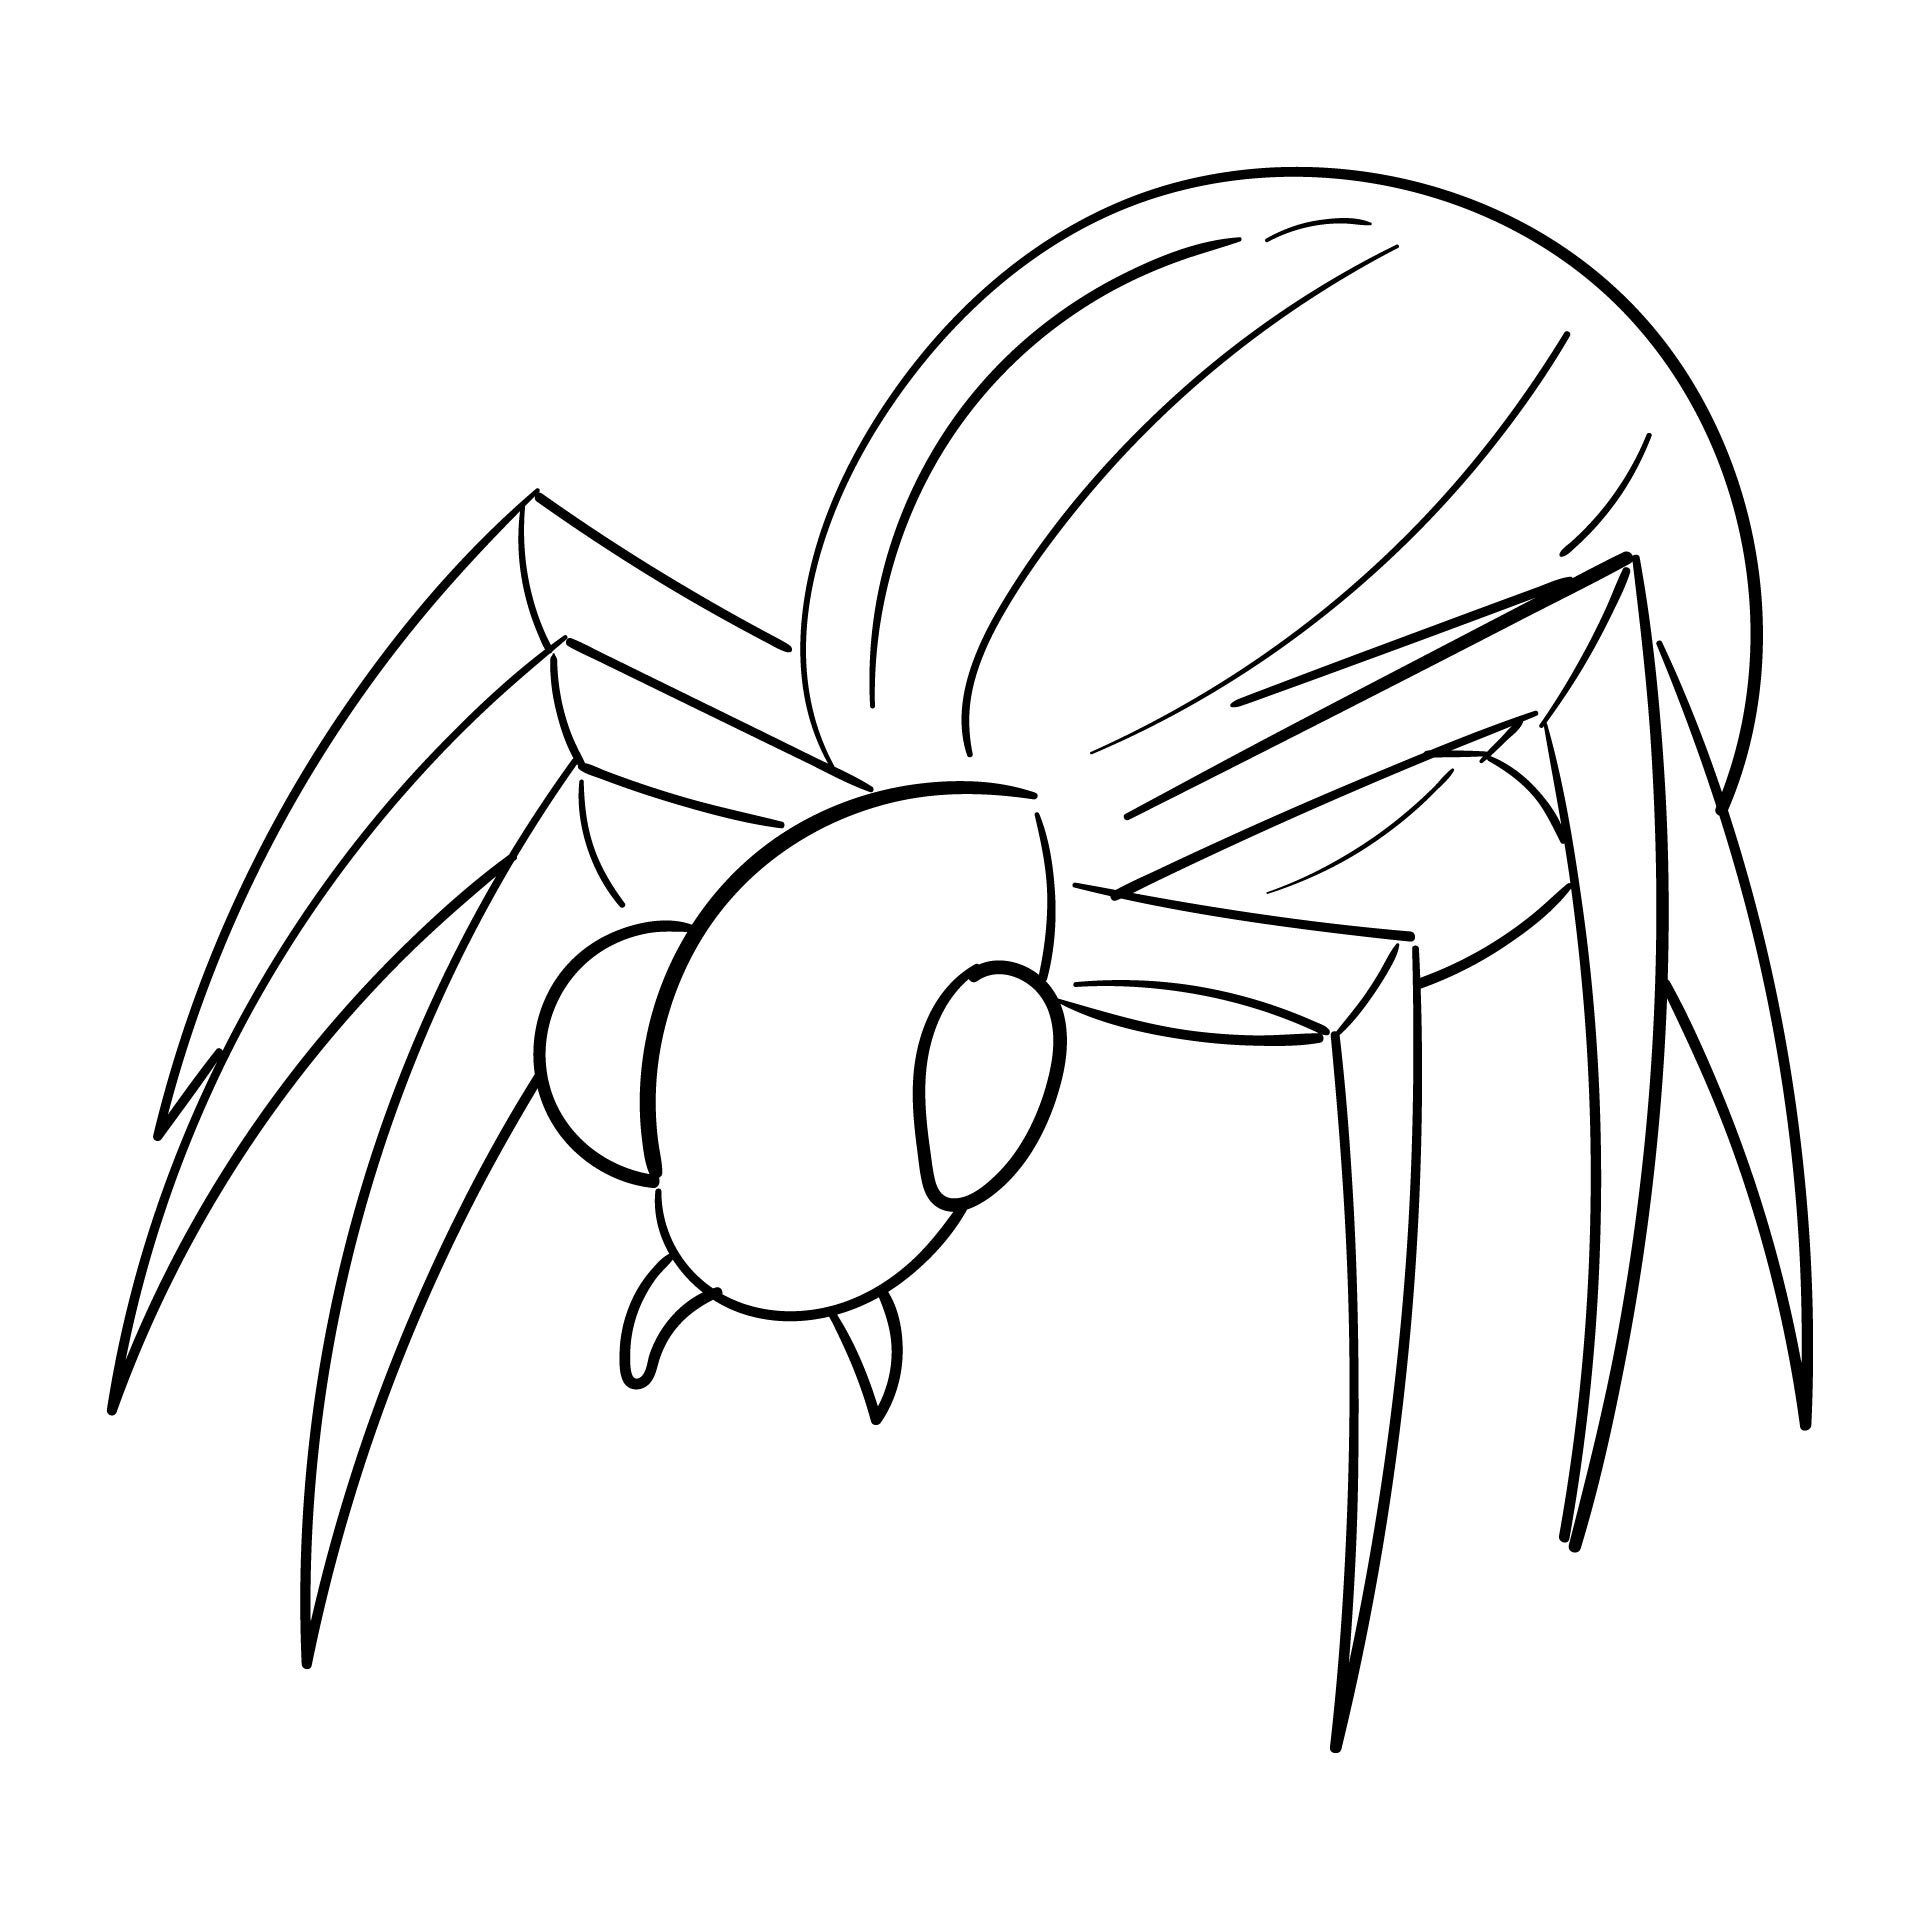 Printable Spider Template